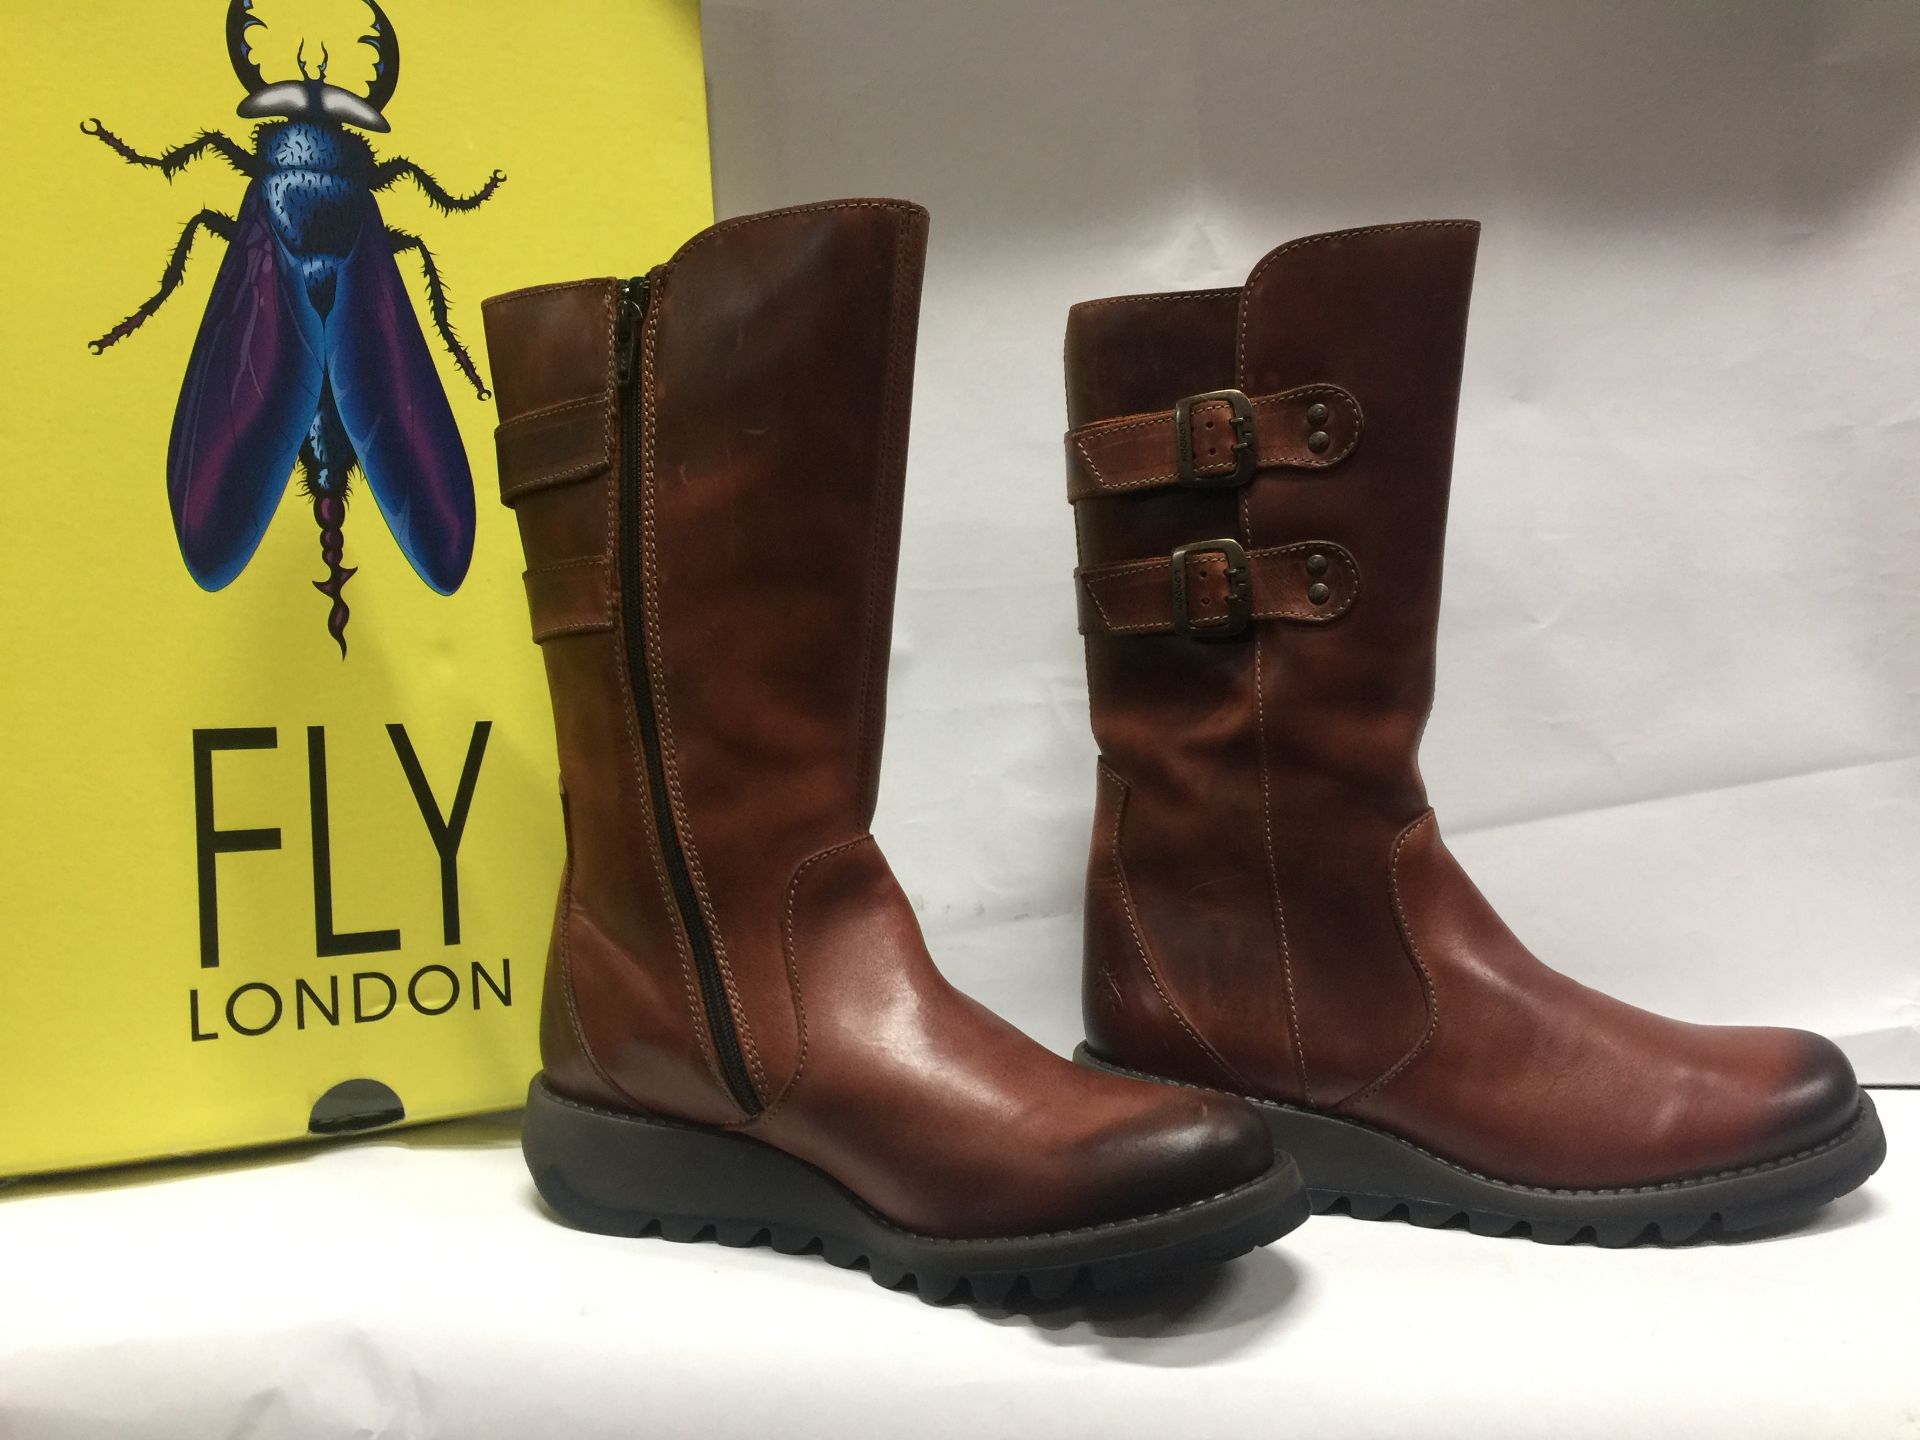 5 x Fly London Women's Boots Mixed Sizes, Styles and Colours Size Ranging EU 37 - EU 42 - Customer R - Image 3 of 4